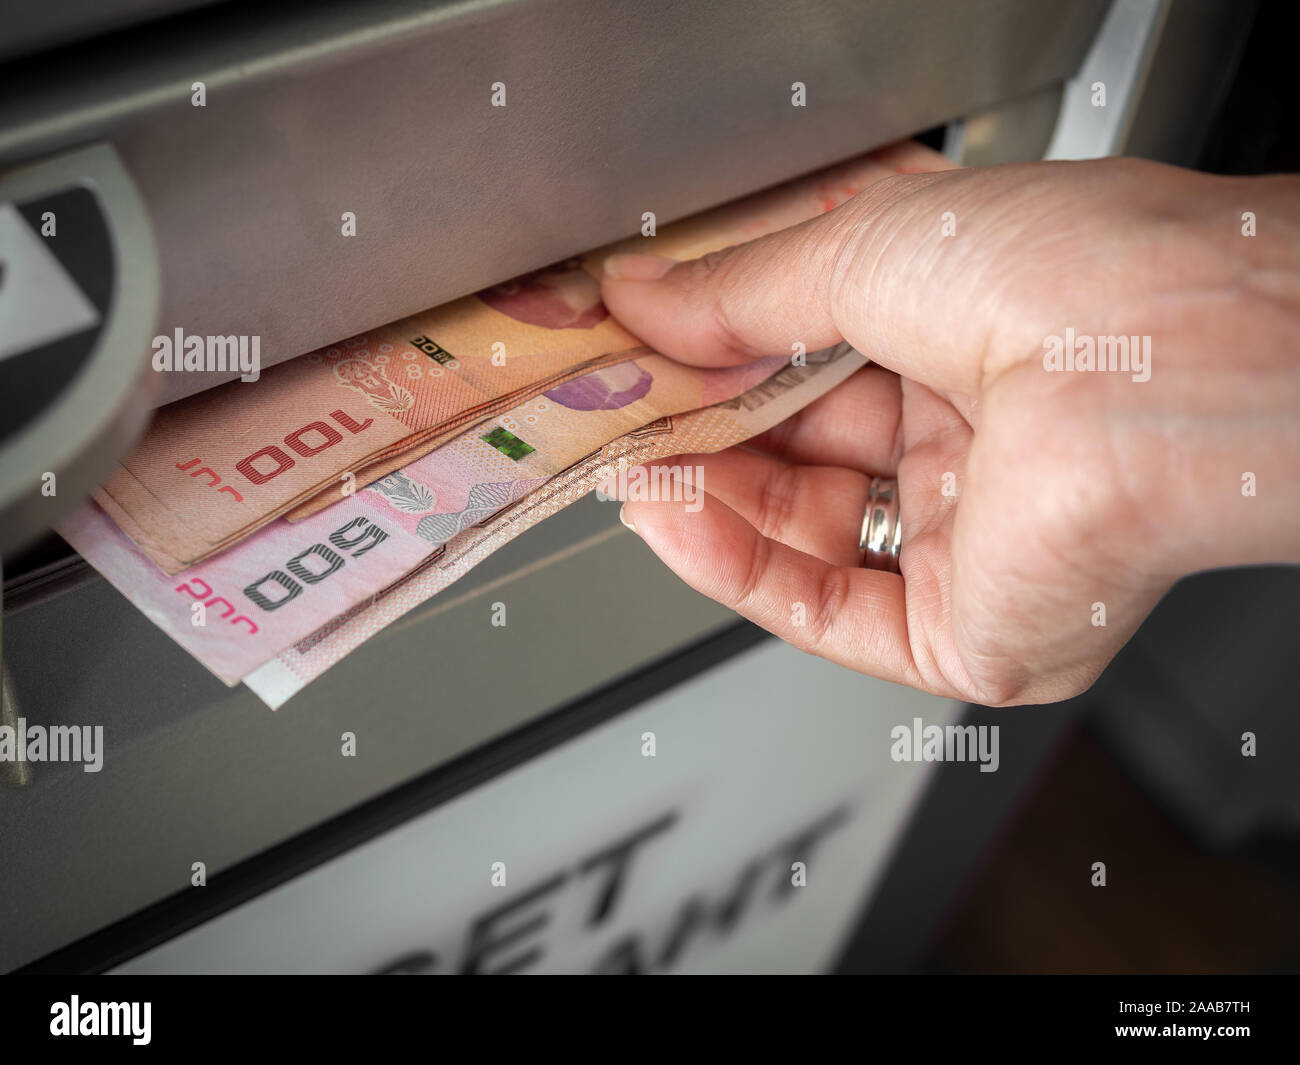 Close-up hand withdraw money, the banknotes thai baht from ATM machine in Thailand. Hand receiving cash money from ATM machine. Stock Photo